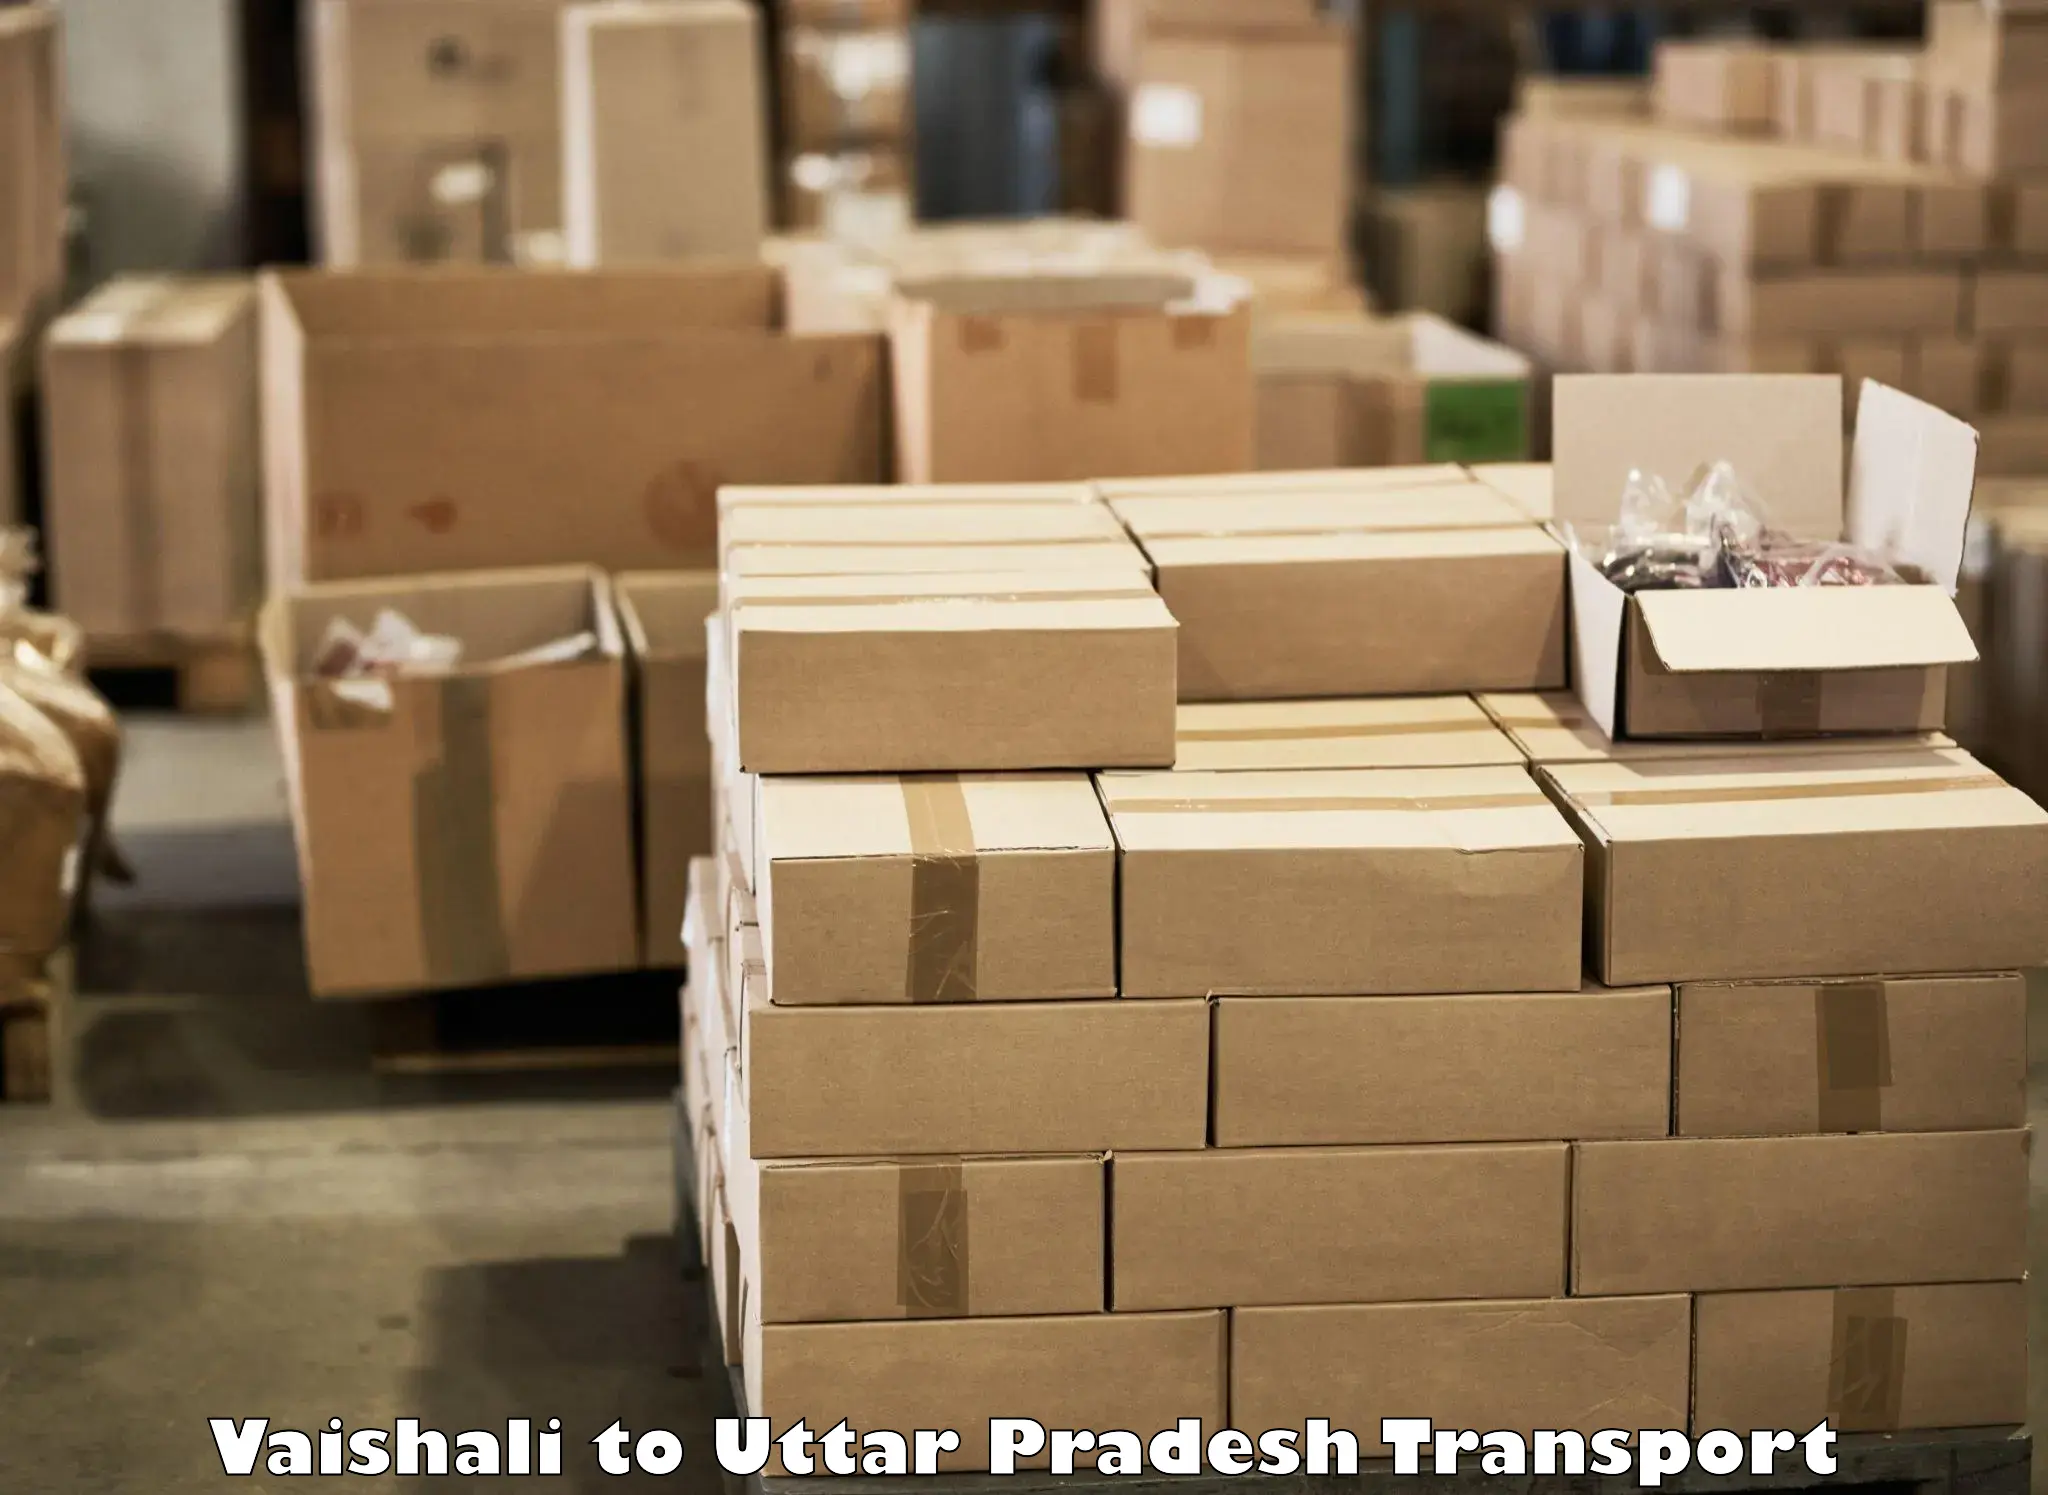 Truck transport companies in India in Vaishali to Agra